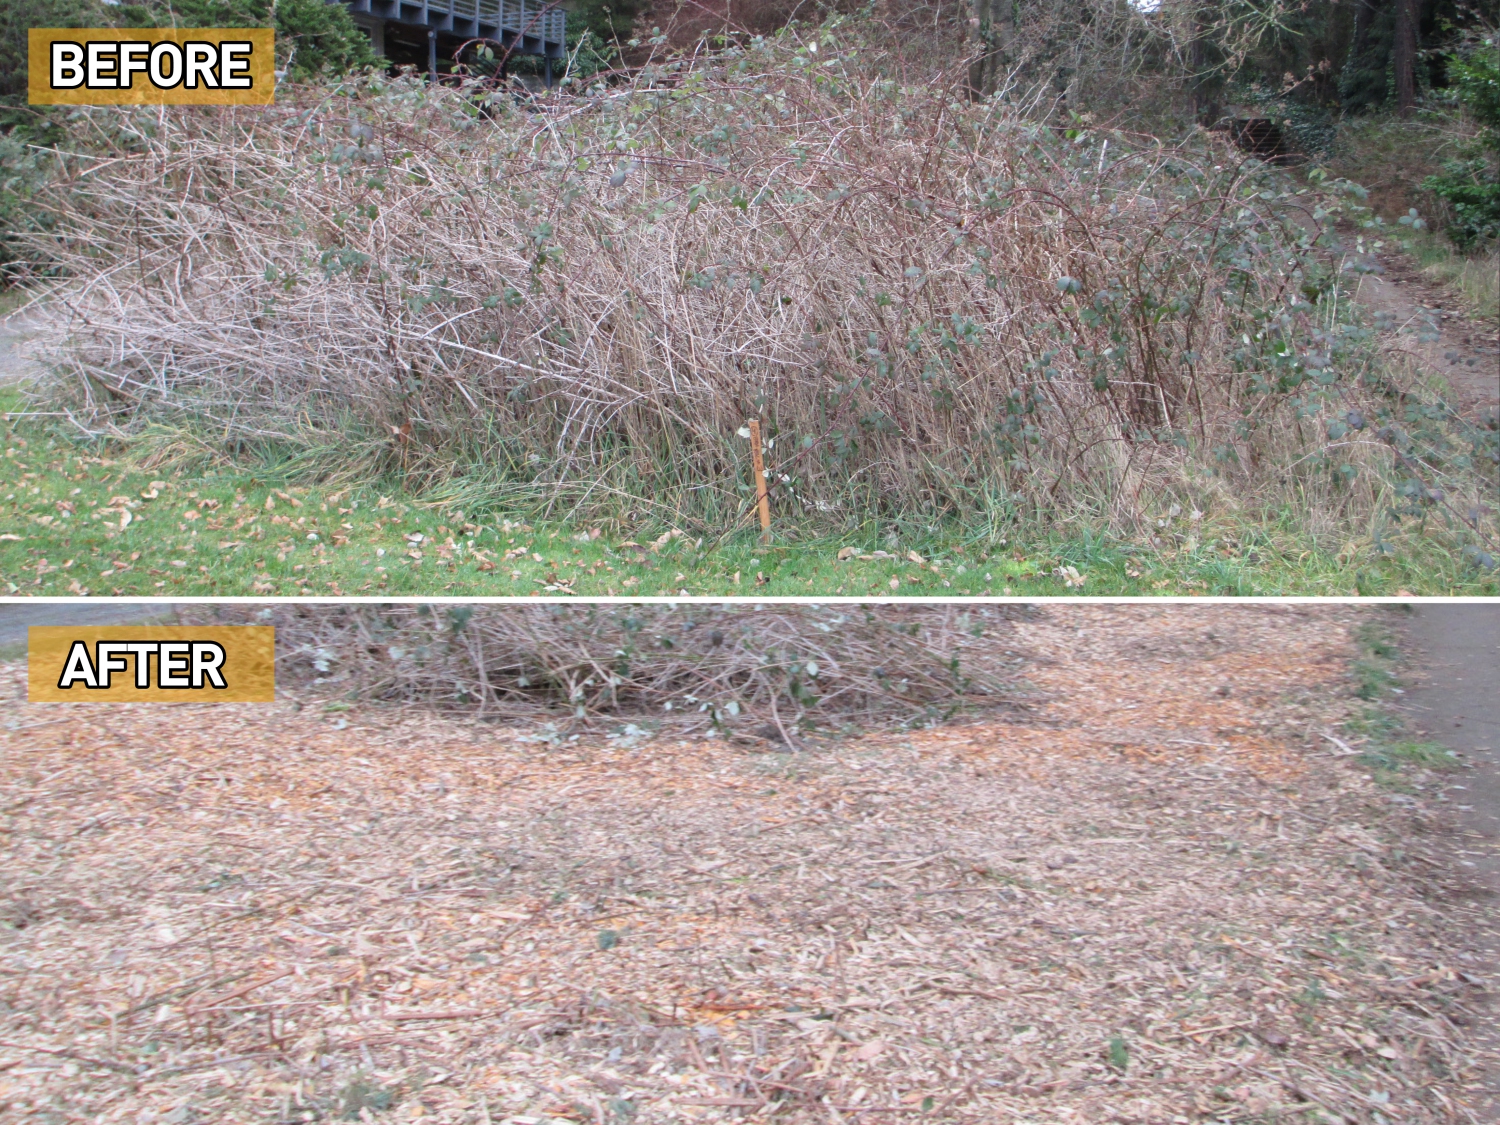 Before and after bramble cleanup (photo from Feet First)